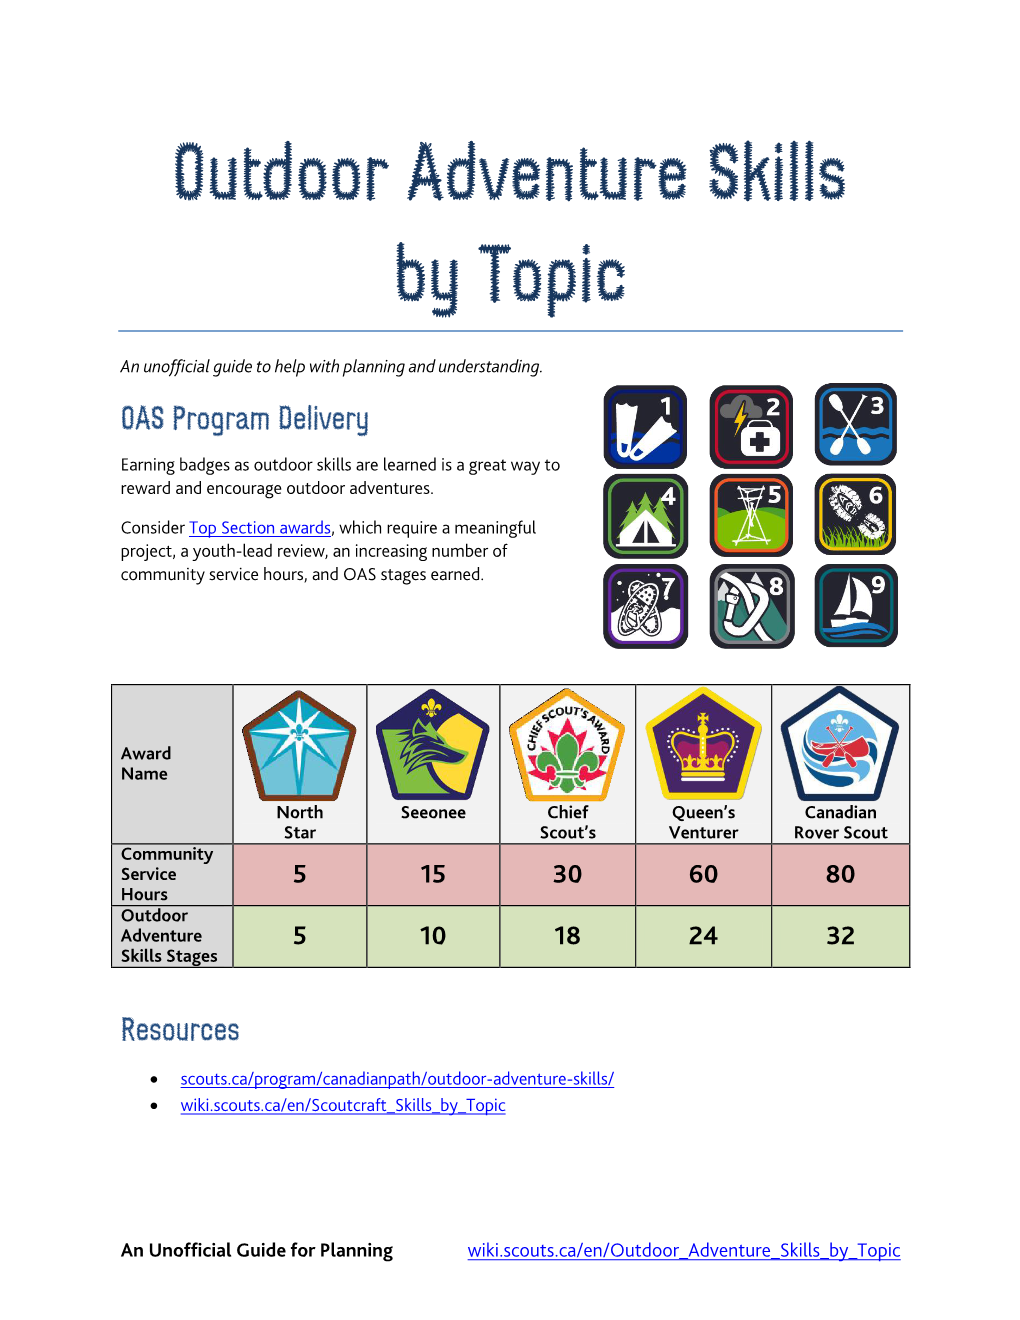 Outdoor Adventure Skills by Topic